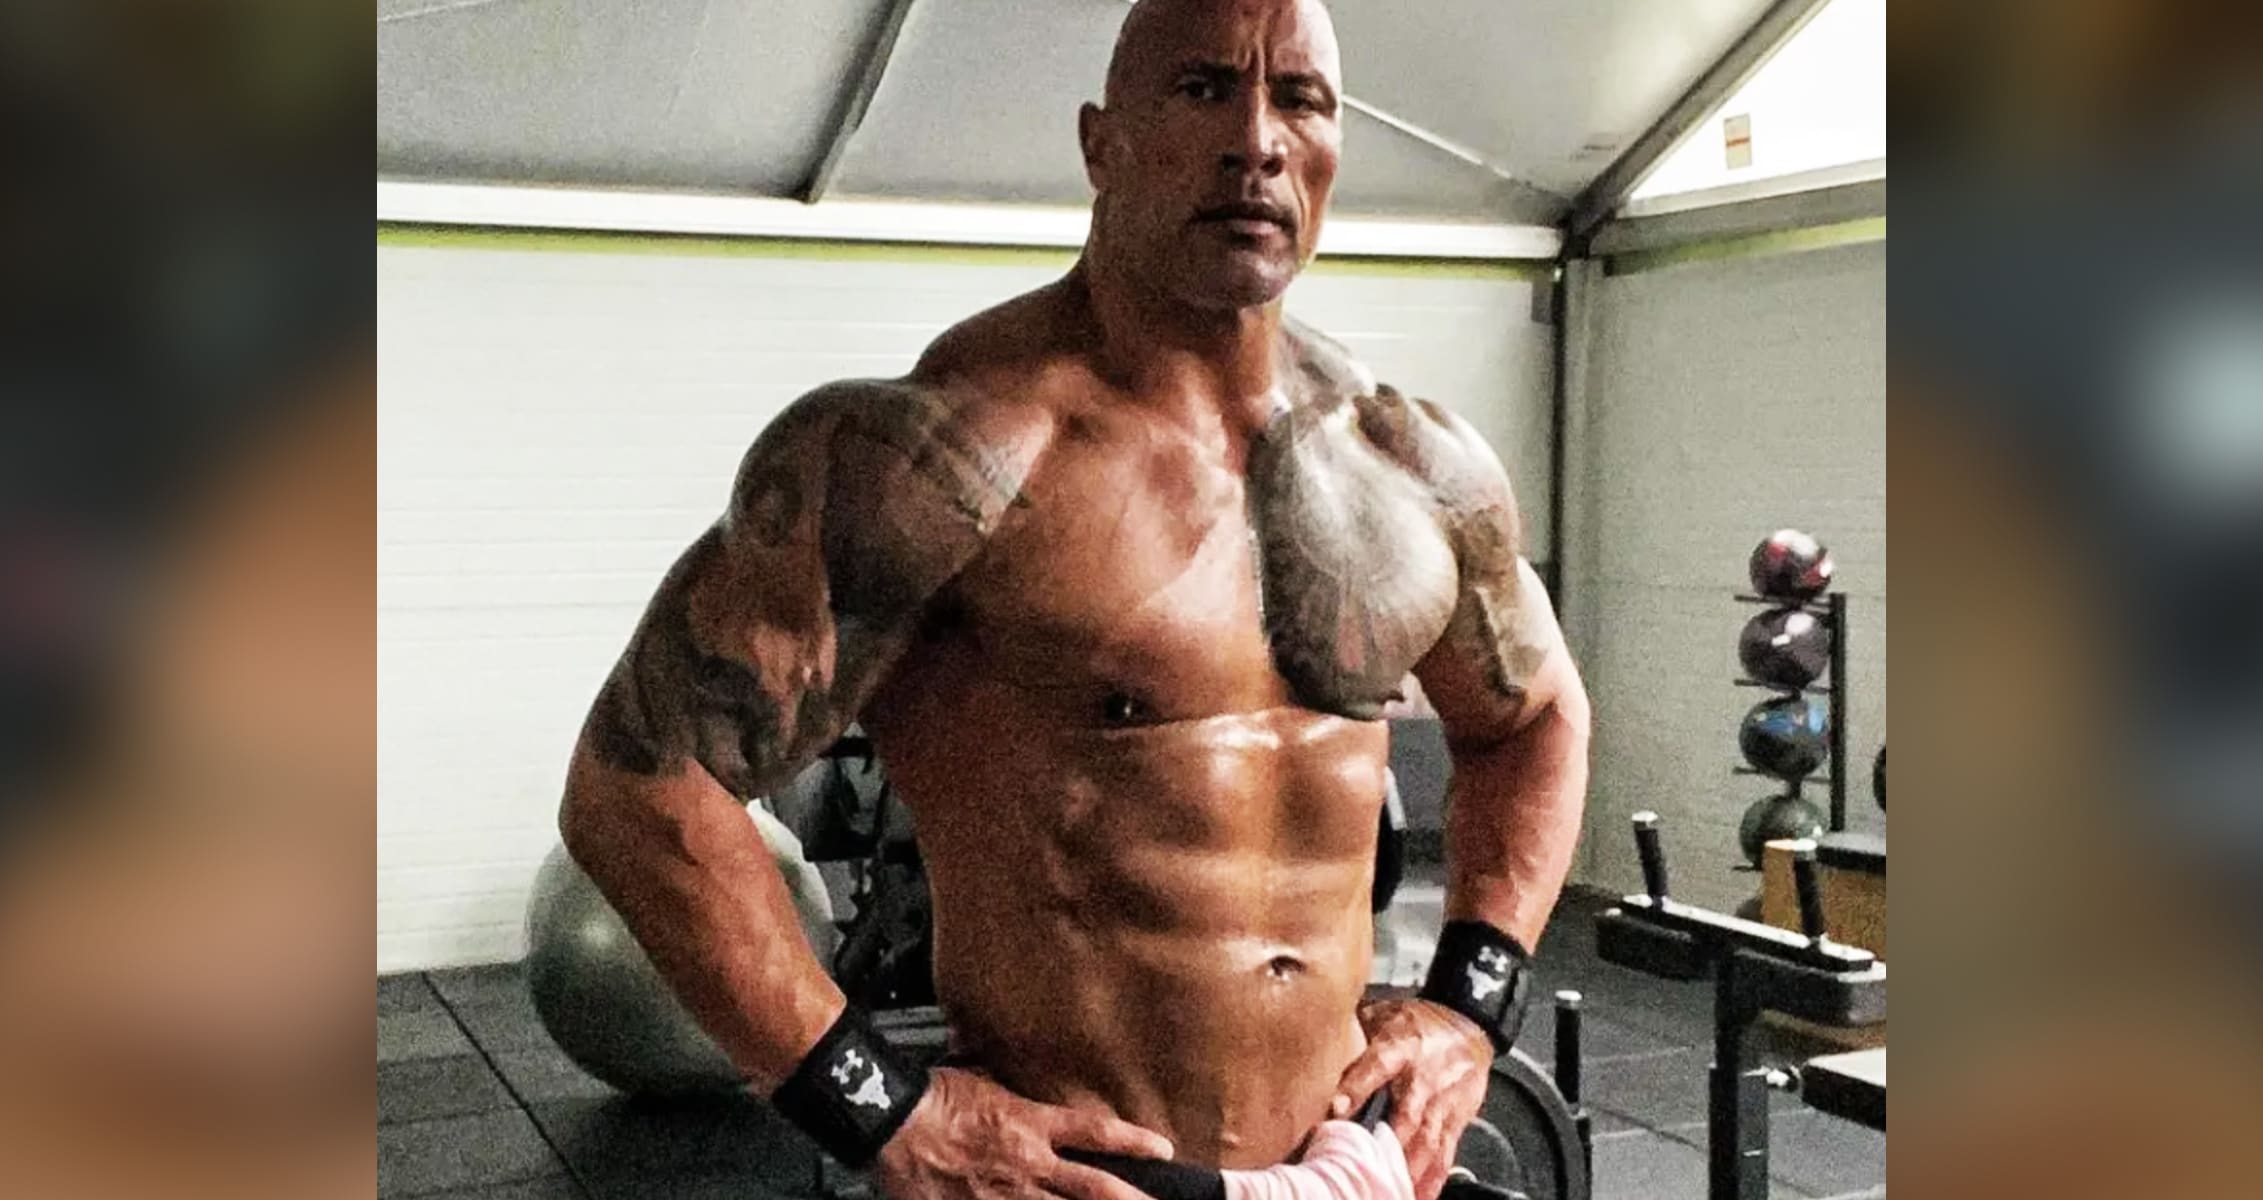 Dwayne “The Rock” Johnson Broadcasts He Will Contend In A Bodybuilding Current This Calendar 12 months